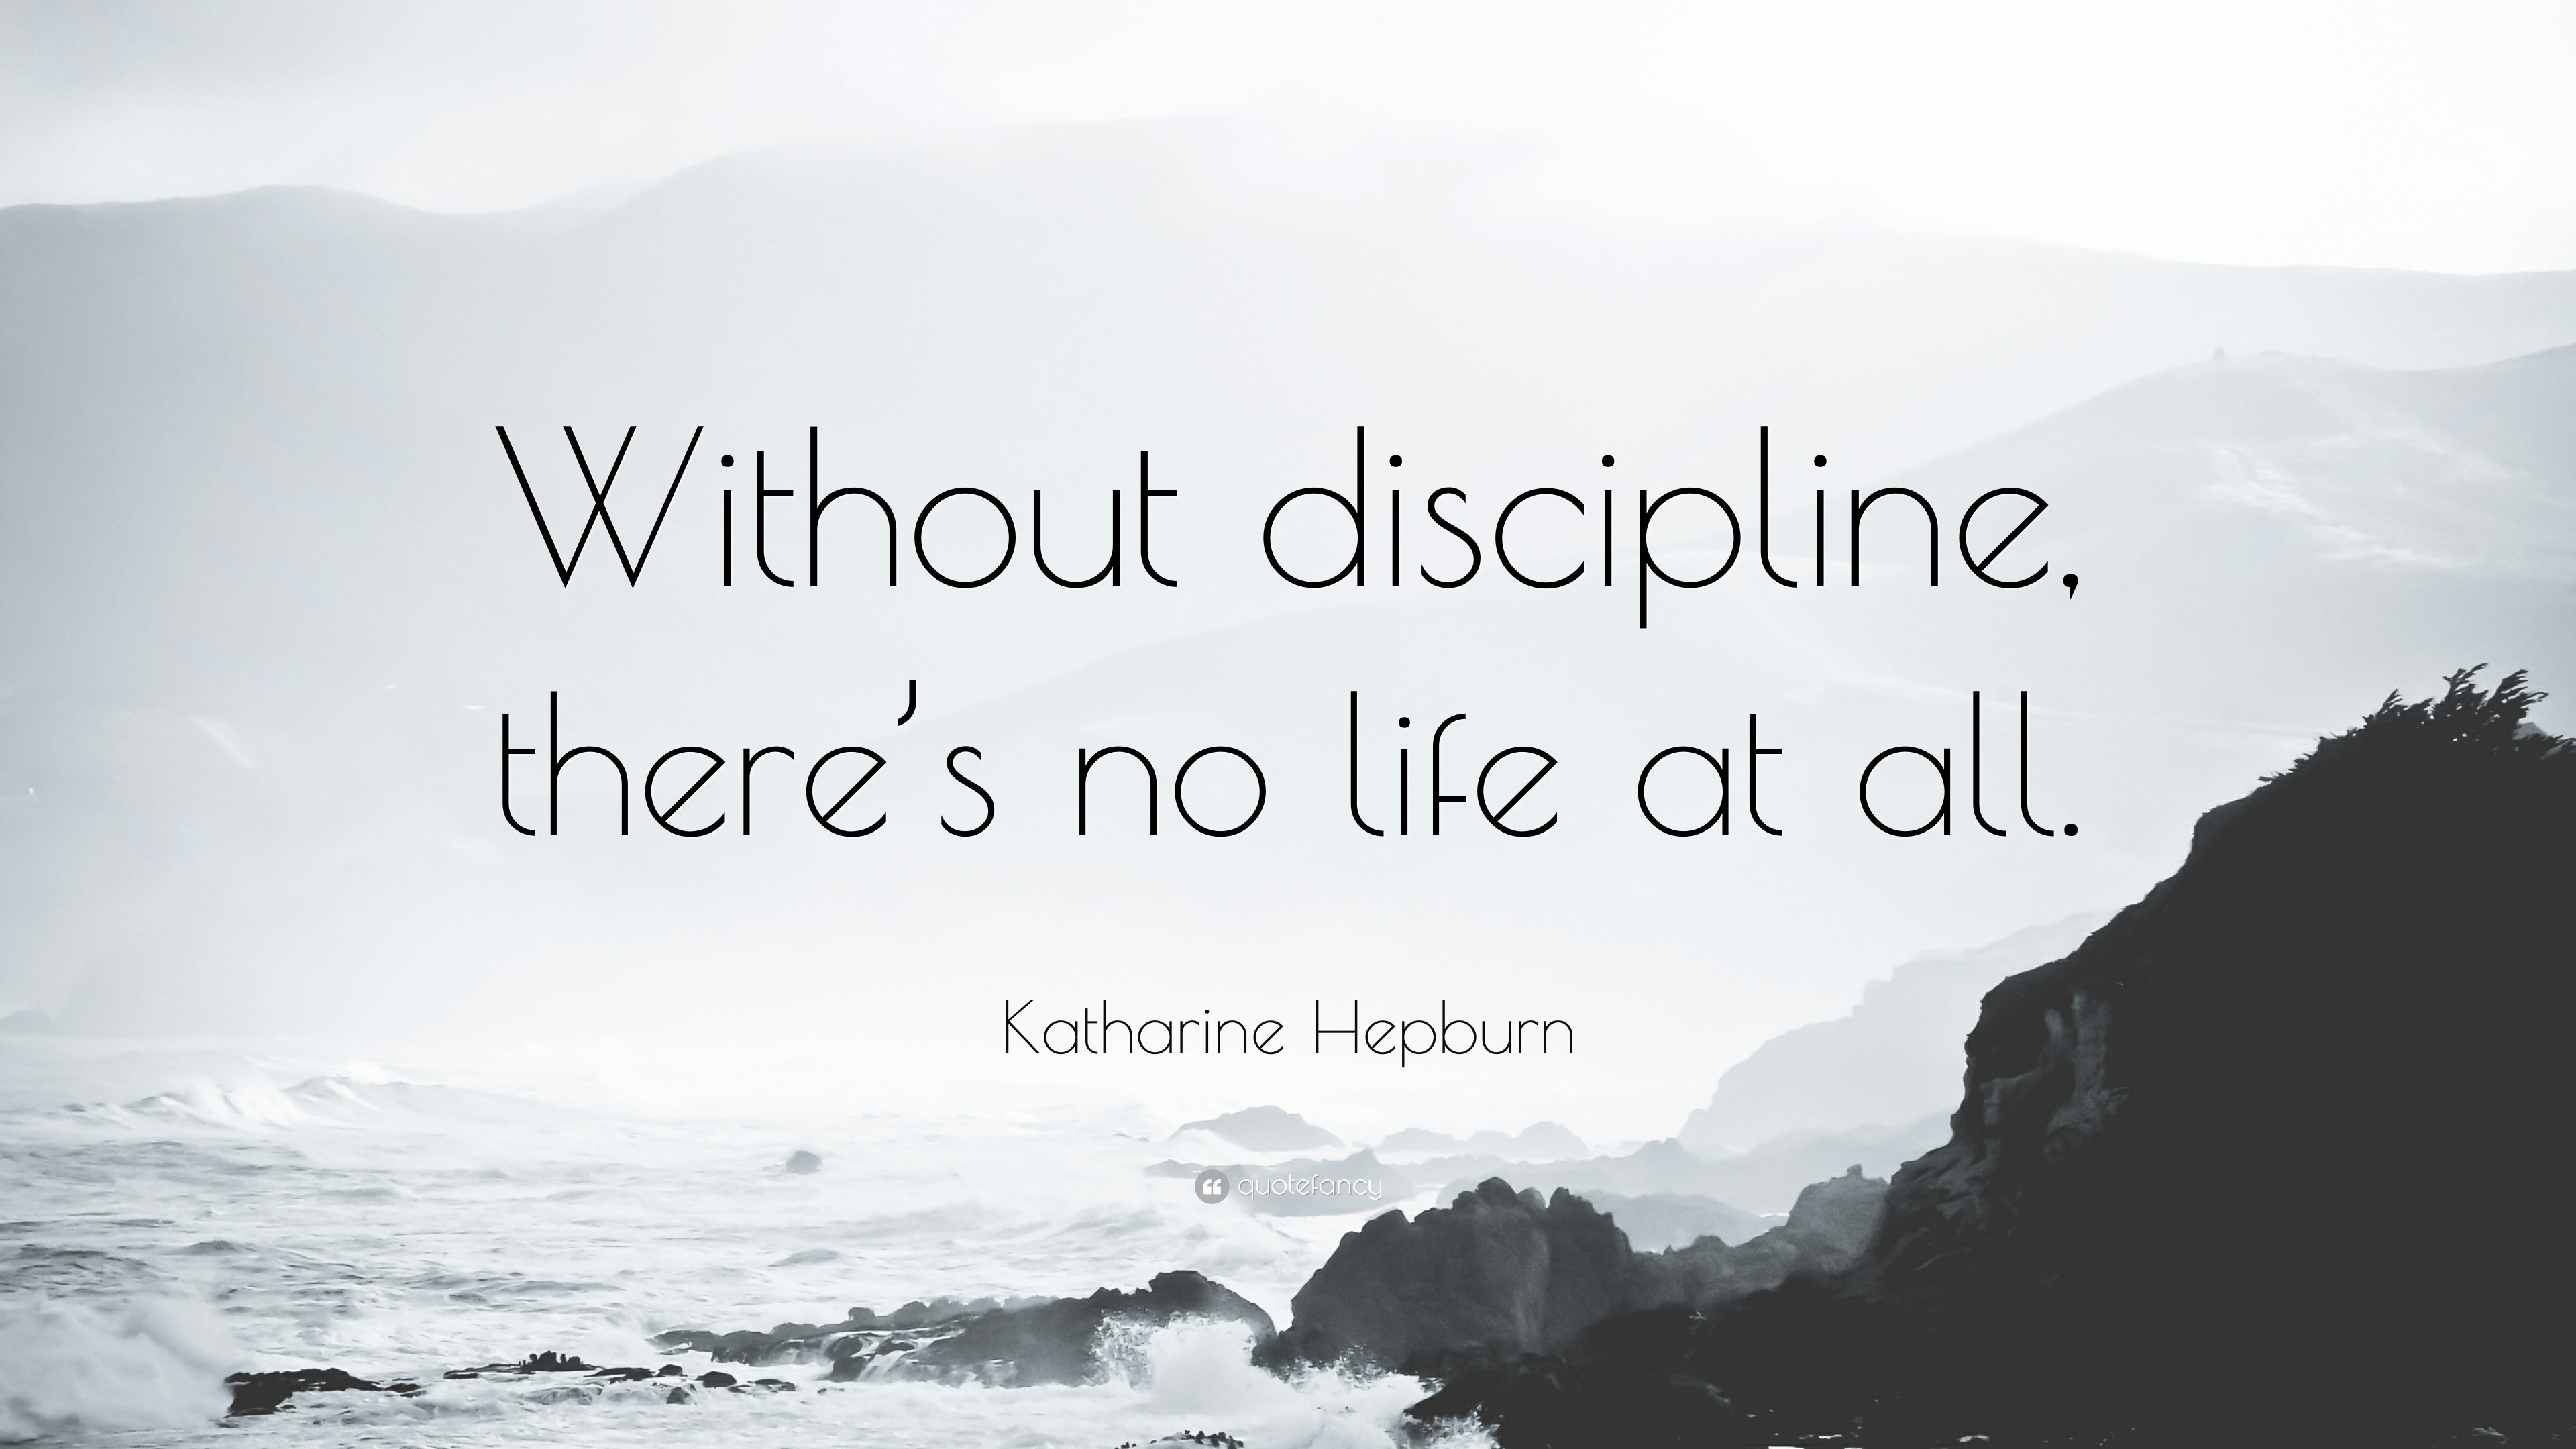 NEW POSTER There is No Life at All Katharine Hepburn Without Discipline